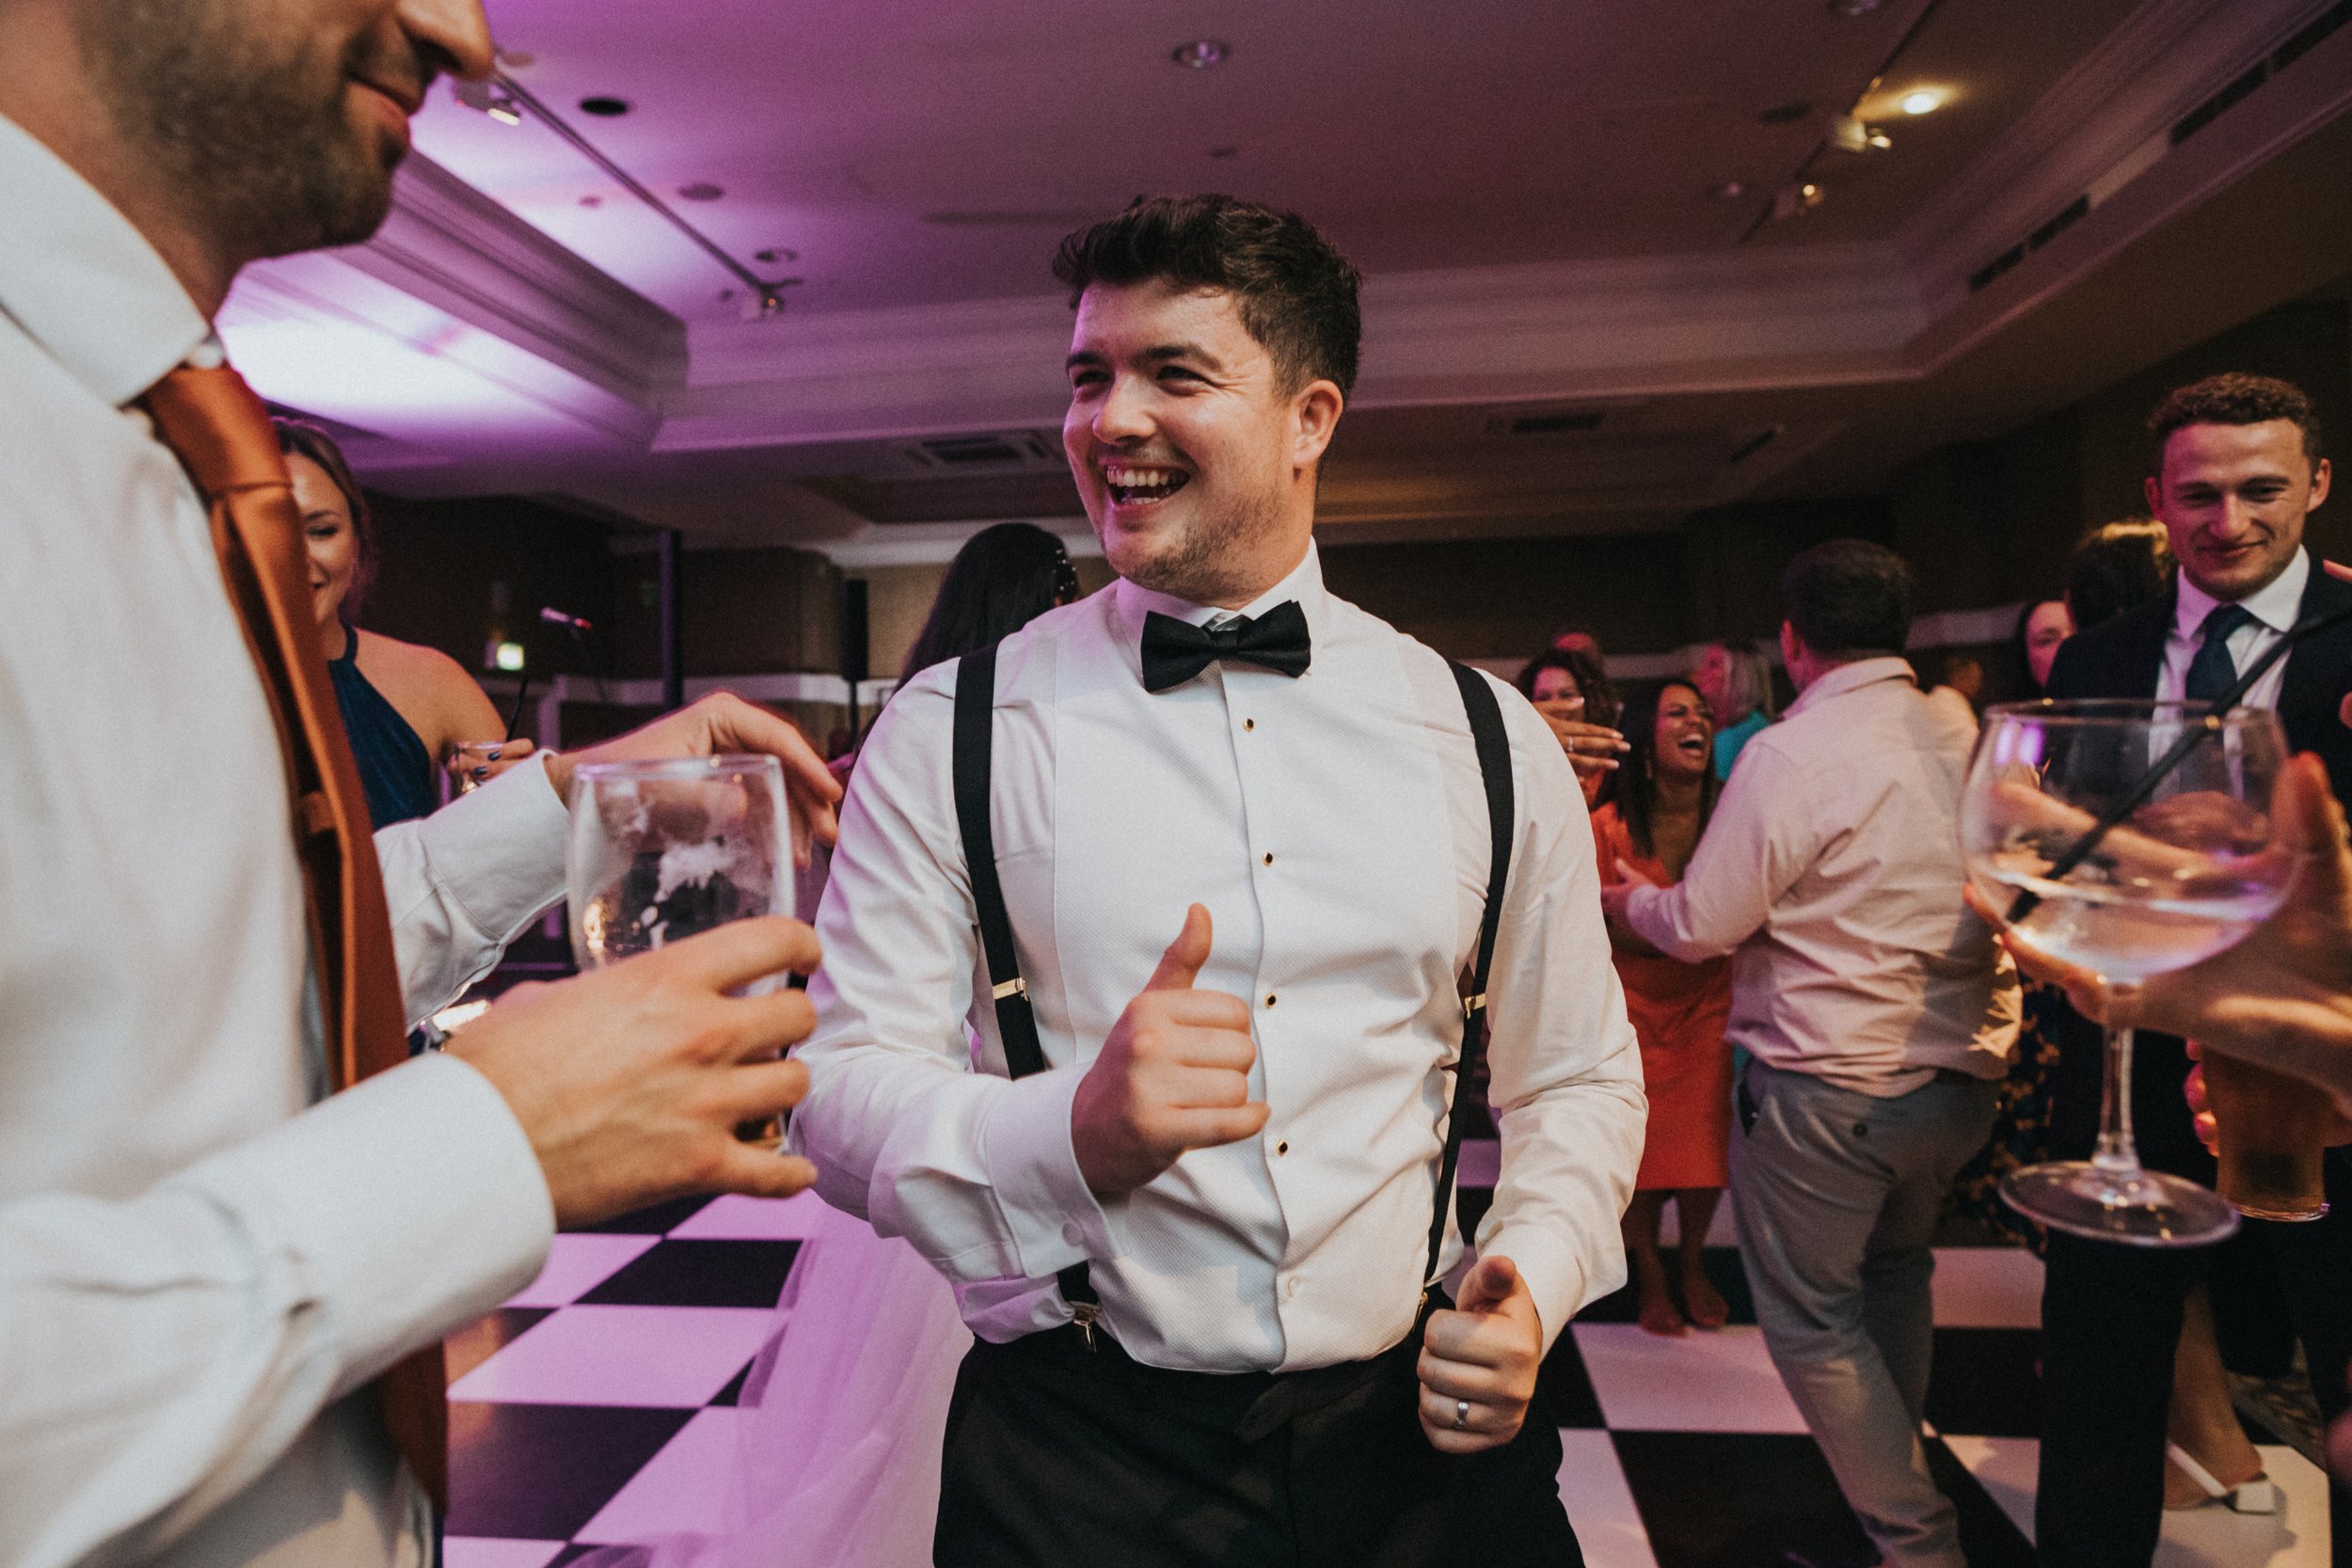 Groom laughing with his mates on the dance floor. 